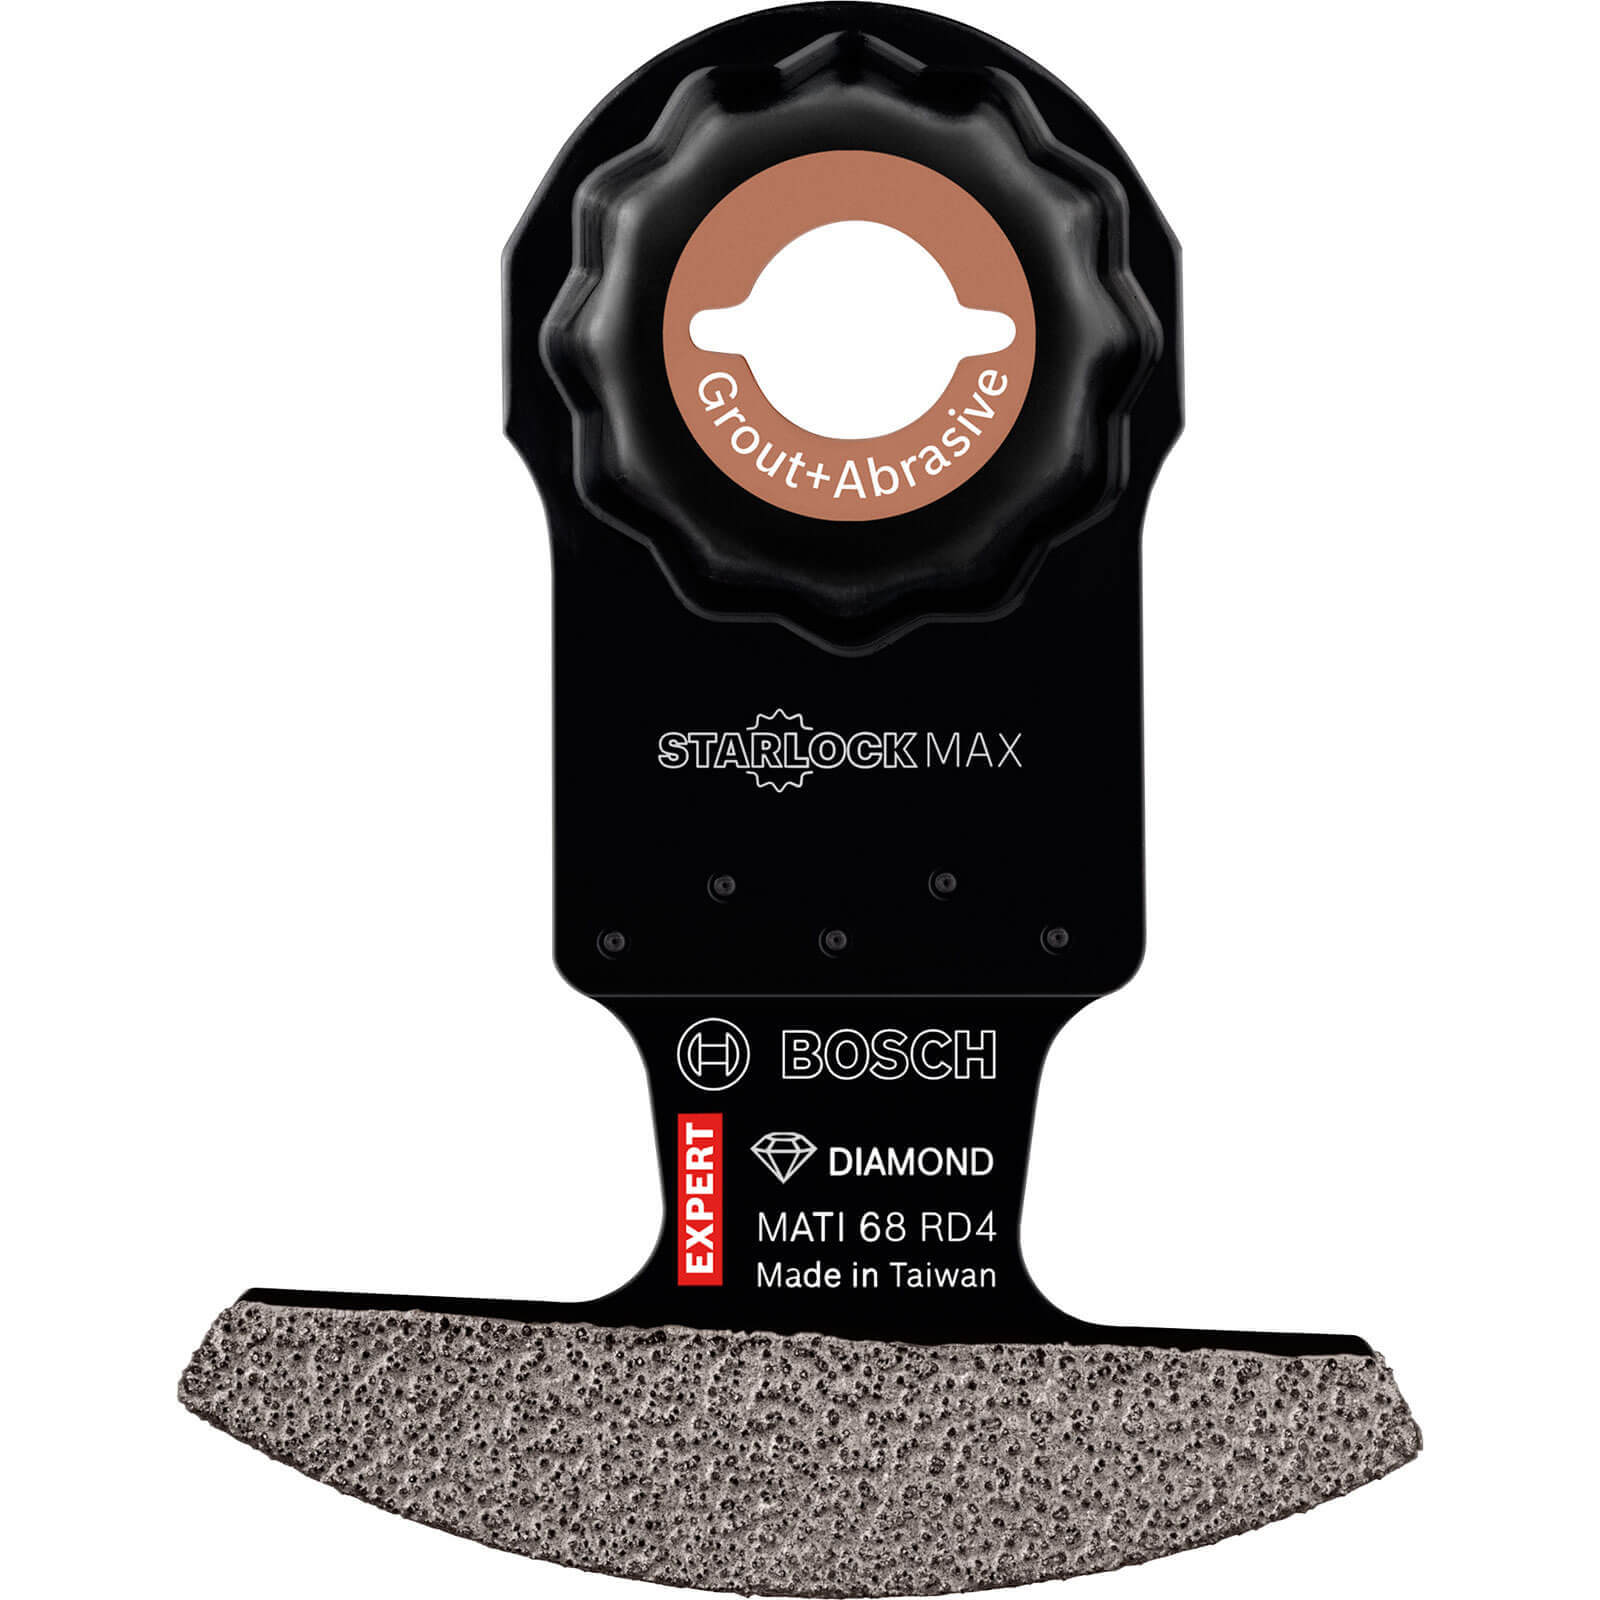 Image of Bosch Expert MATI 68 RD4 Abrasive and Grout Starlock Max Oscillating Multi Tool Segment Saw Blade 68mm Pack of 1